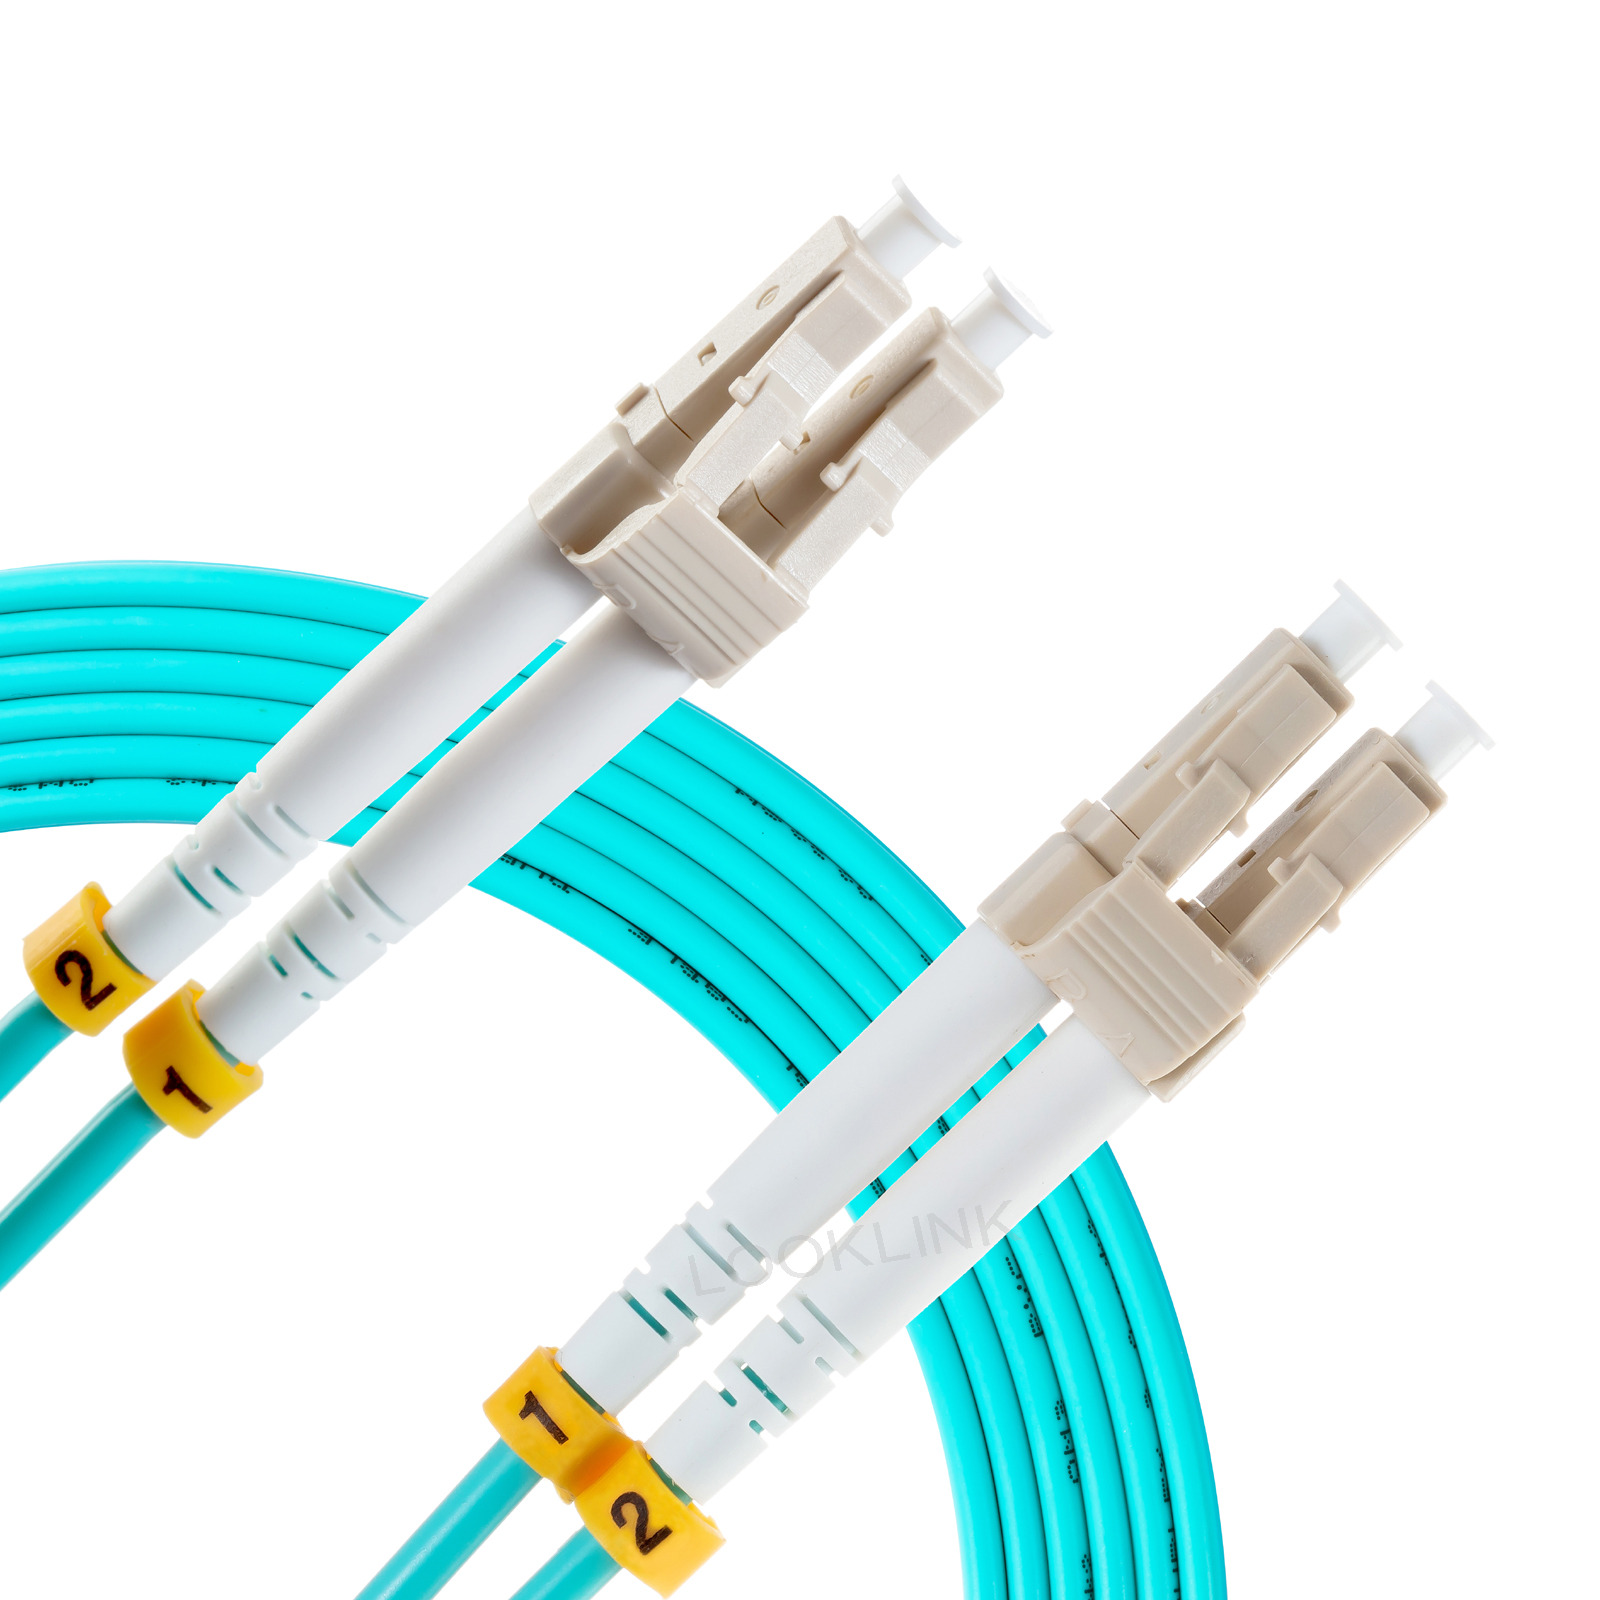 1M - 10M Length 10G-50/125 OM3 Multimode Duplex LC to LC Fiber Optic Patch Cable